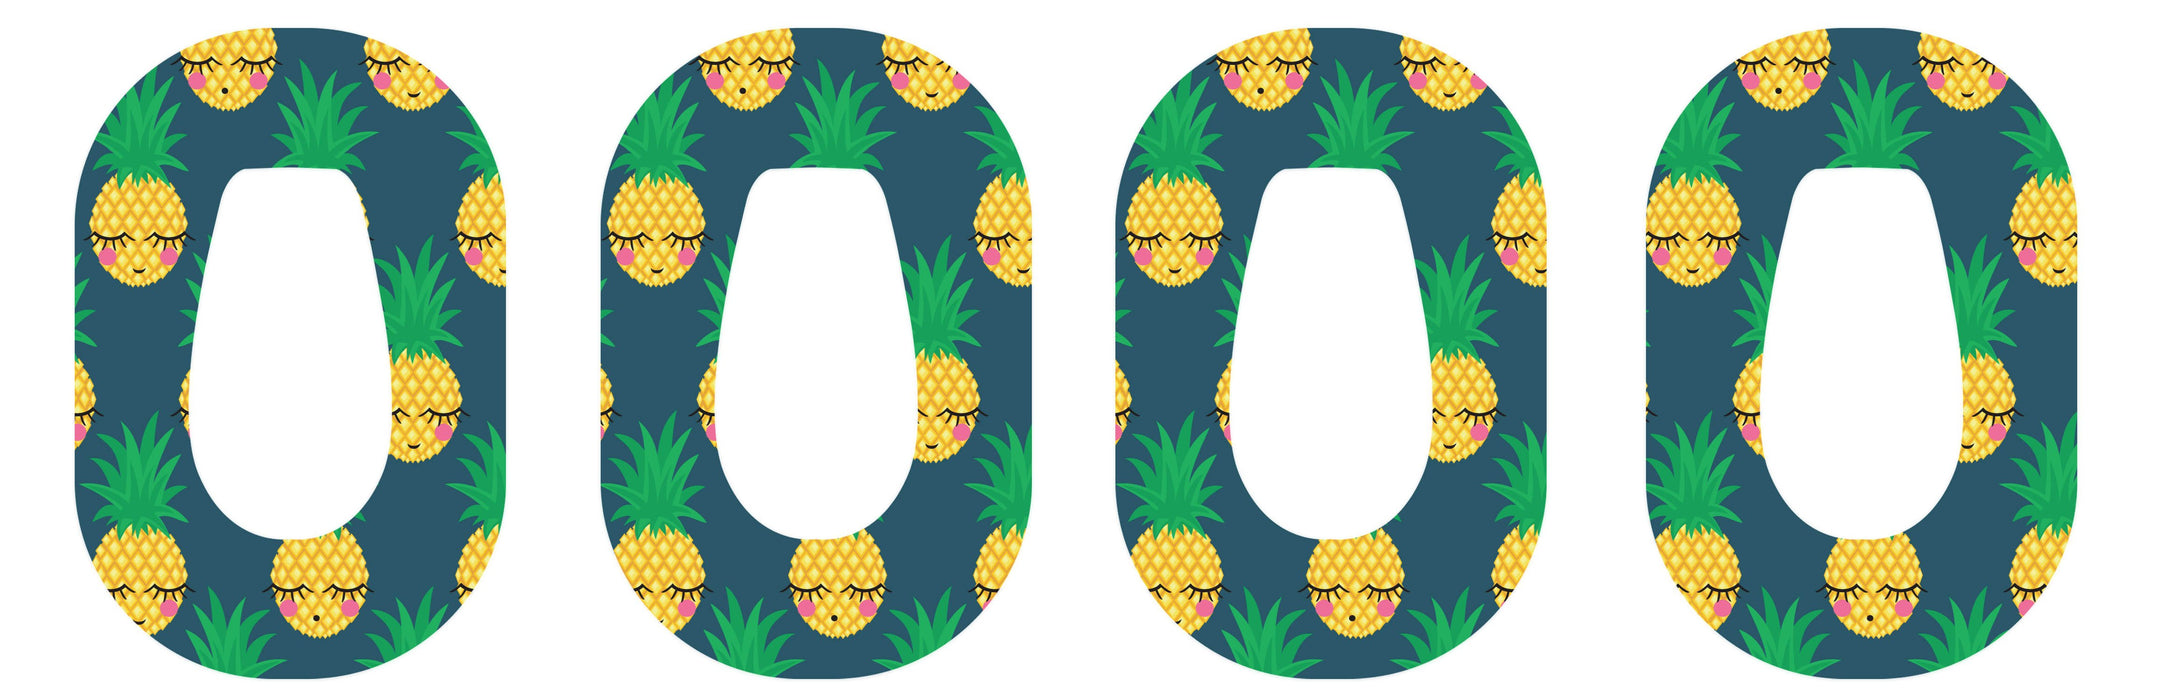 Sleeping Pineapples For Patch+ Dexcom G6 Tape 4-Pack